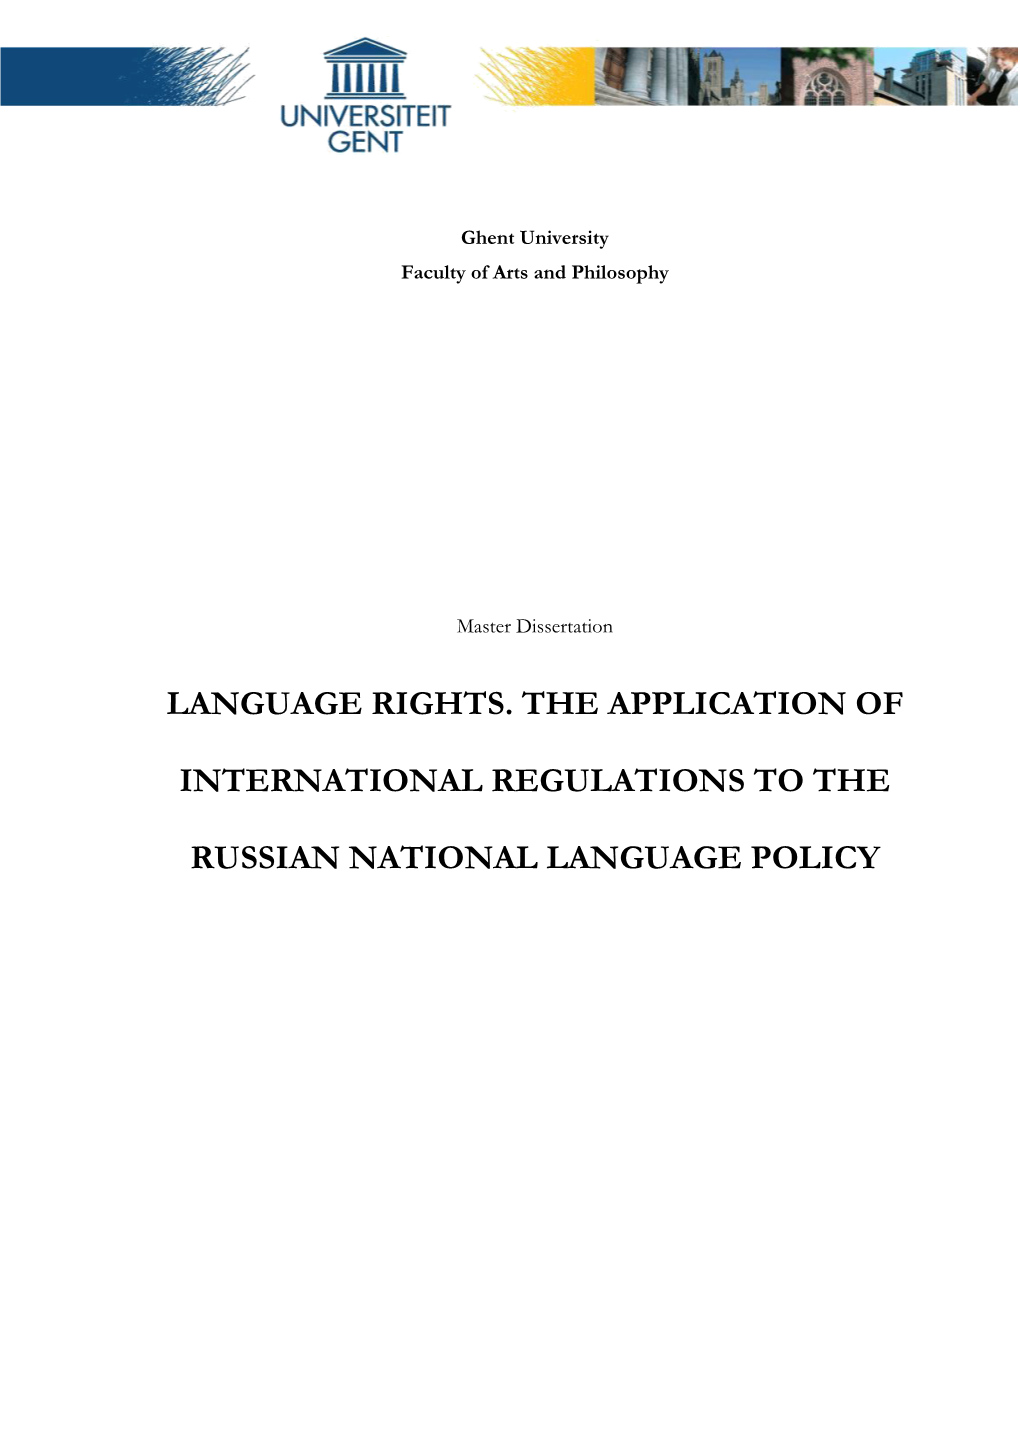 Language Rights. the Application of International Regulations to the Russian National Language Policy